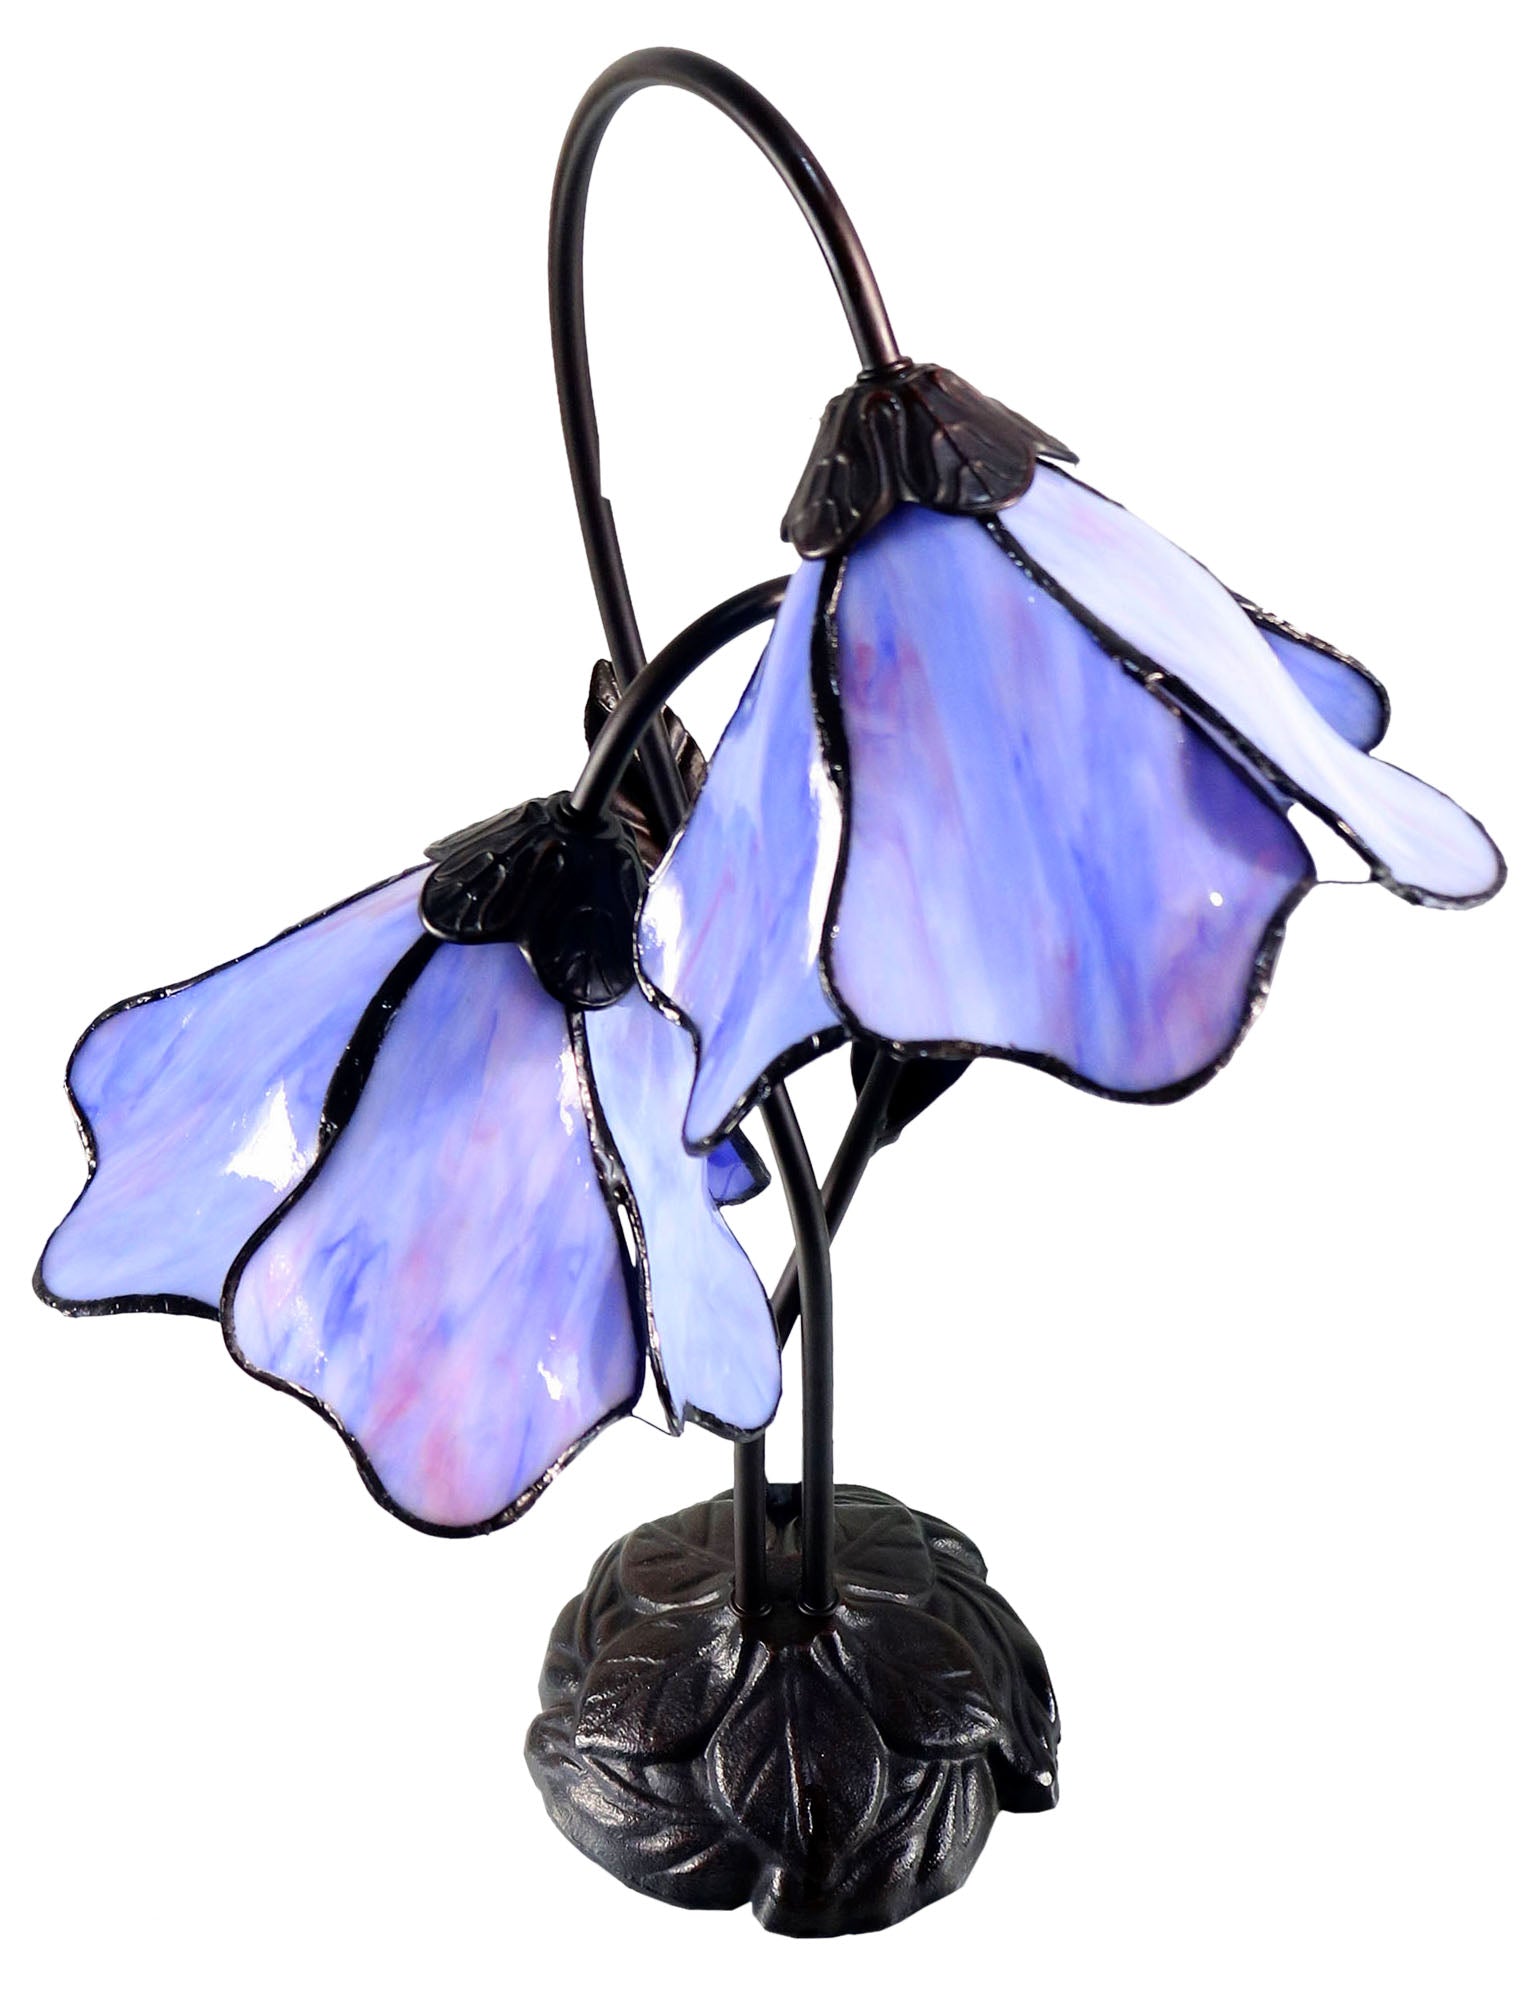 Double Lamp shade Flower  Water Lily Style Tiffany Table Lamp*Blue-Purple